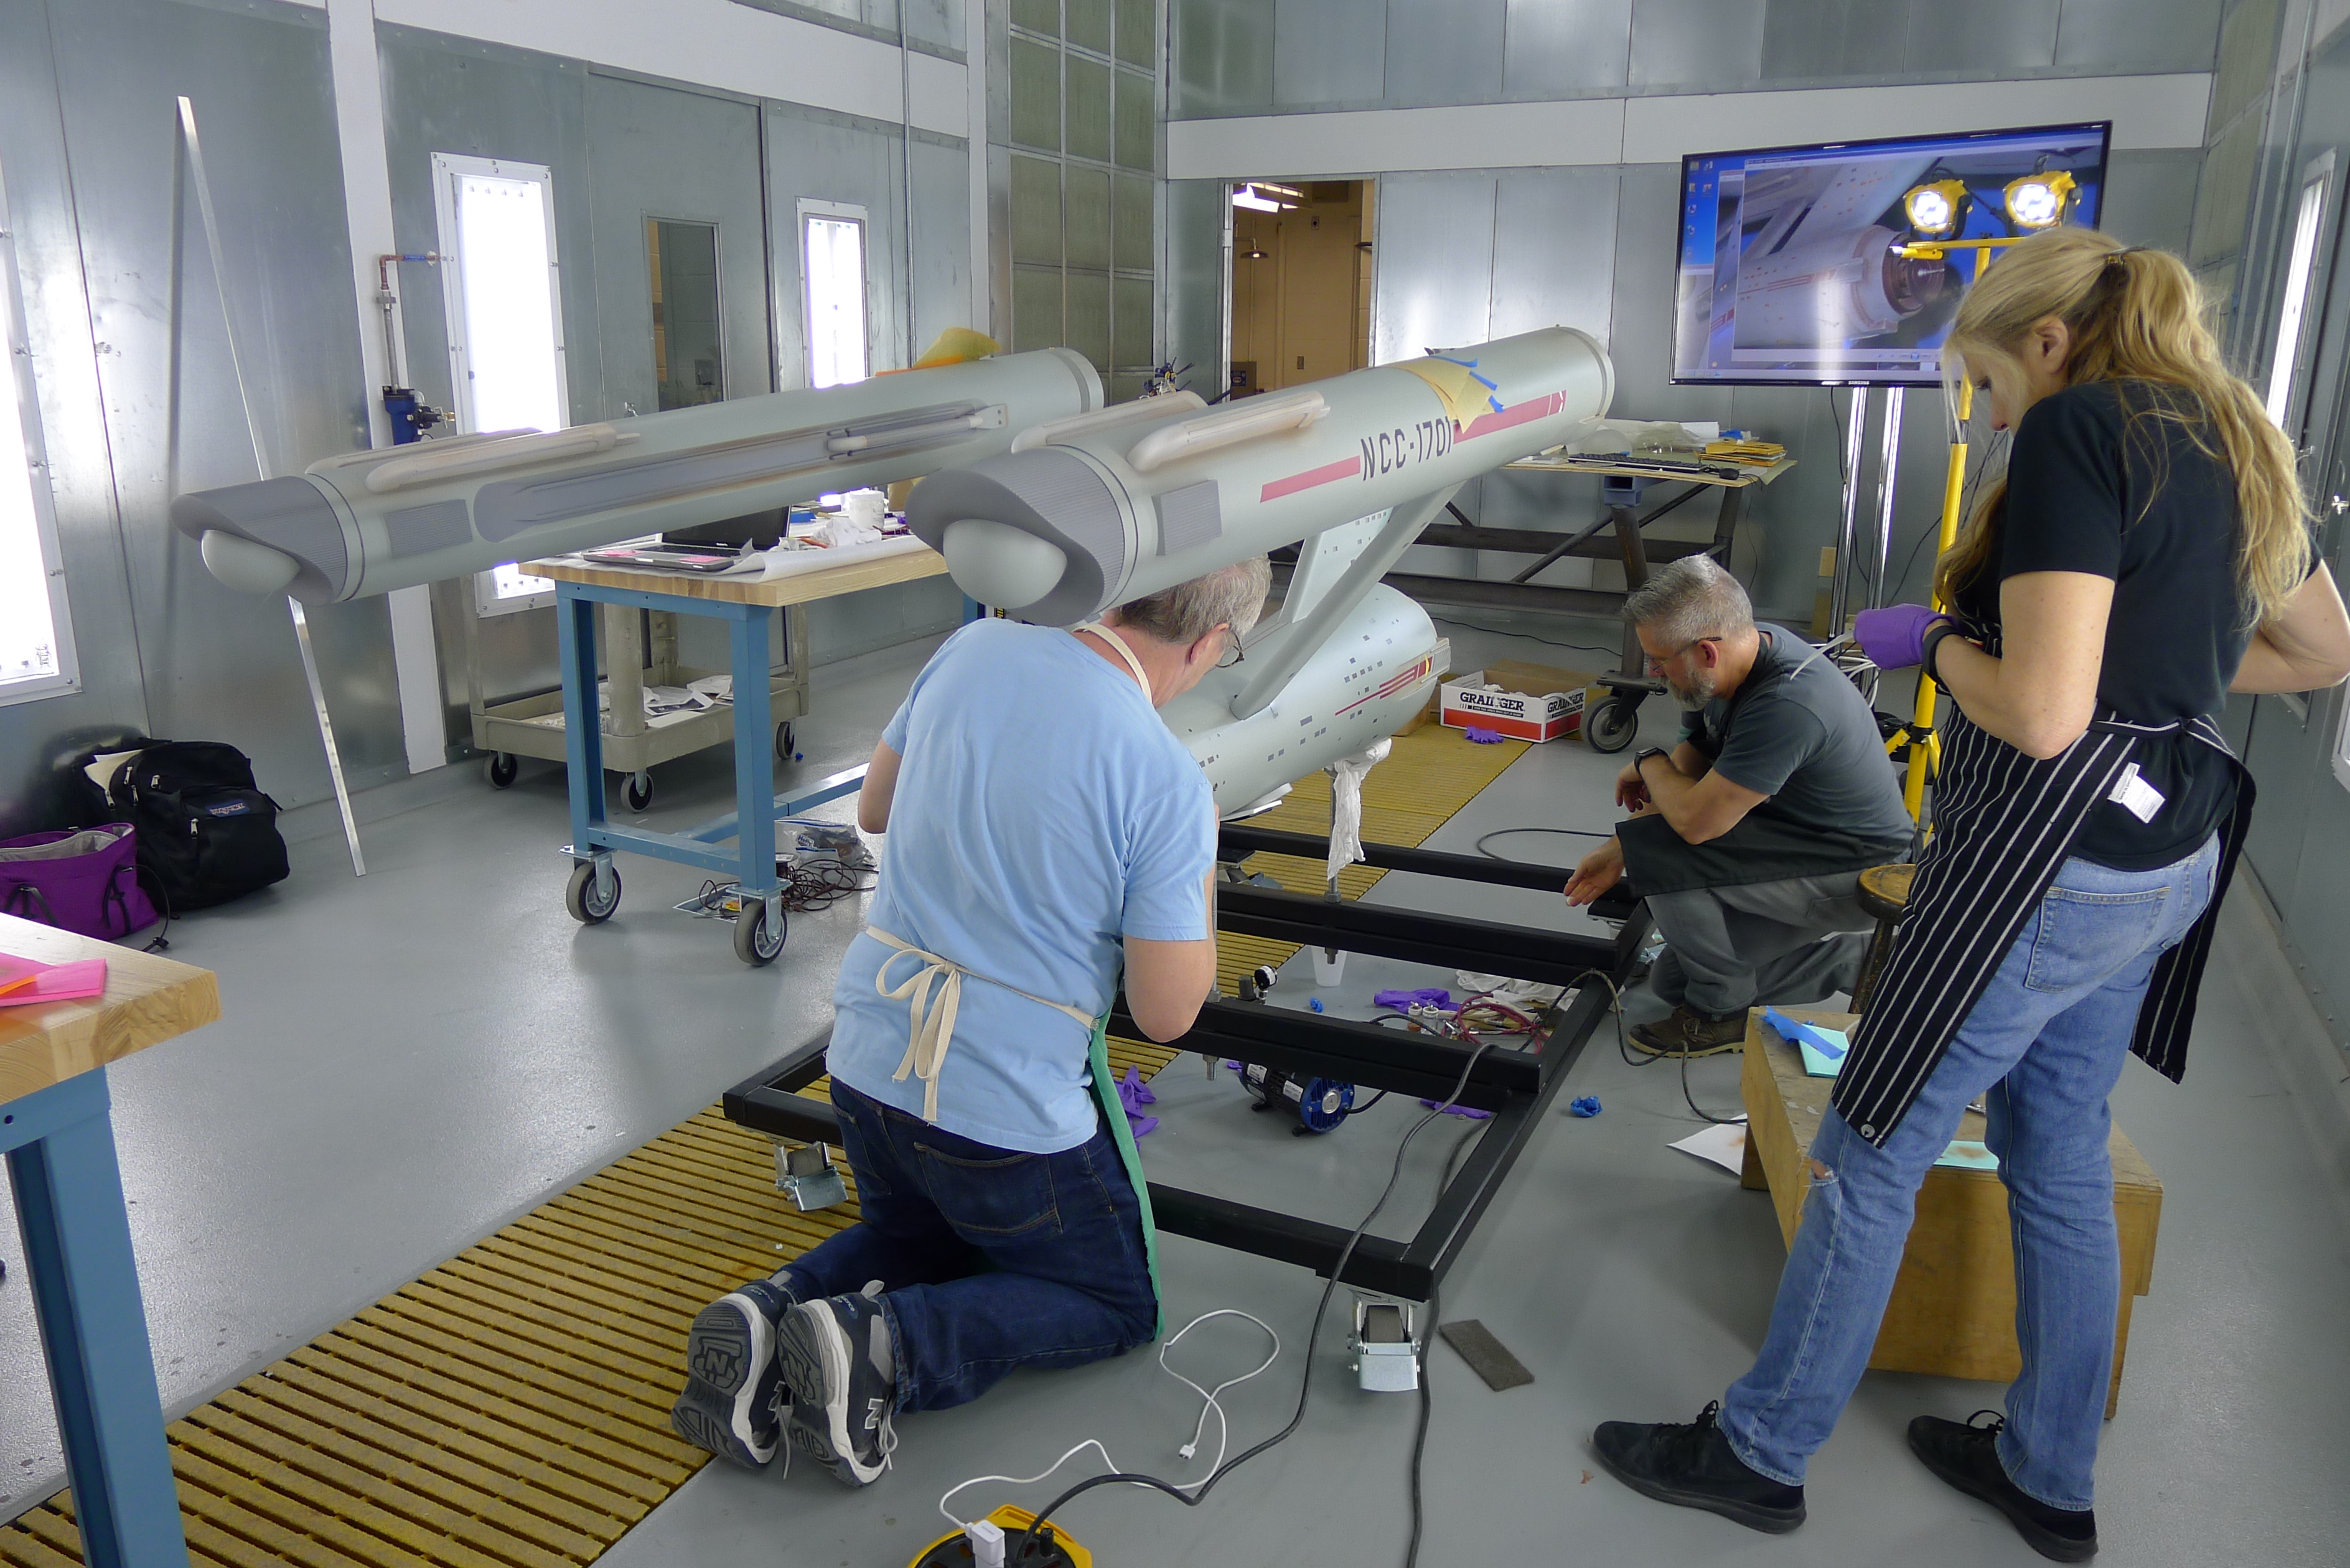 Fully Restored Star Trek Enterprise Unveiled at Smithsonian Air and Space  Museum